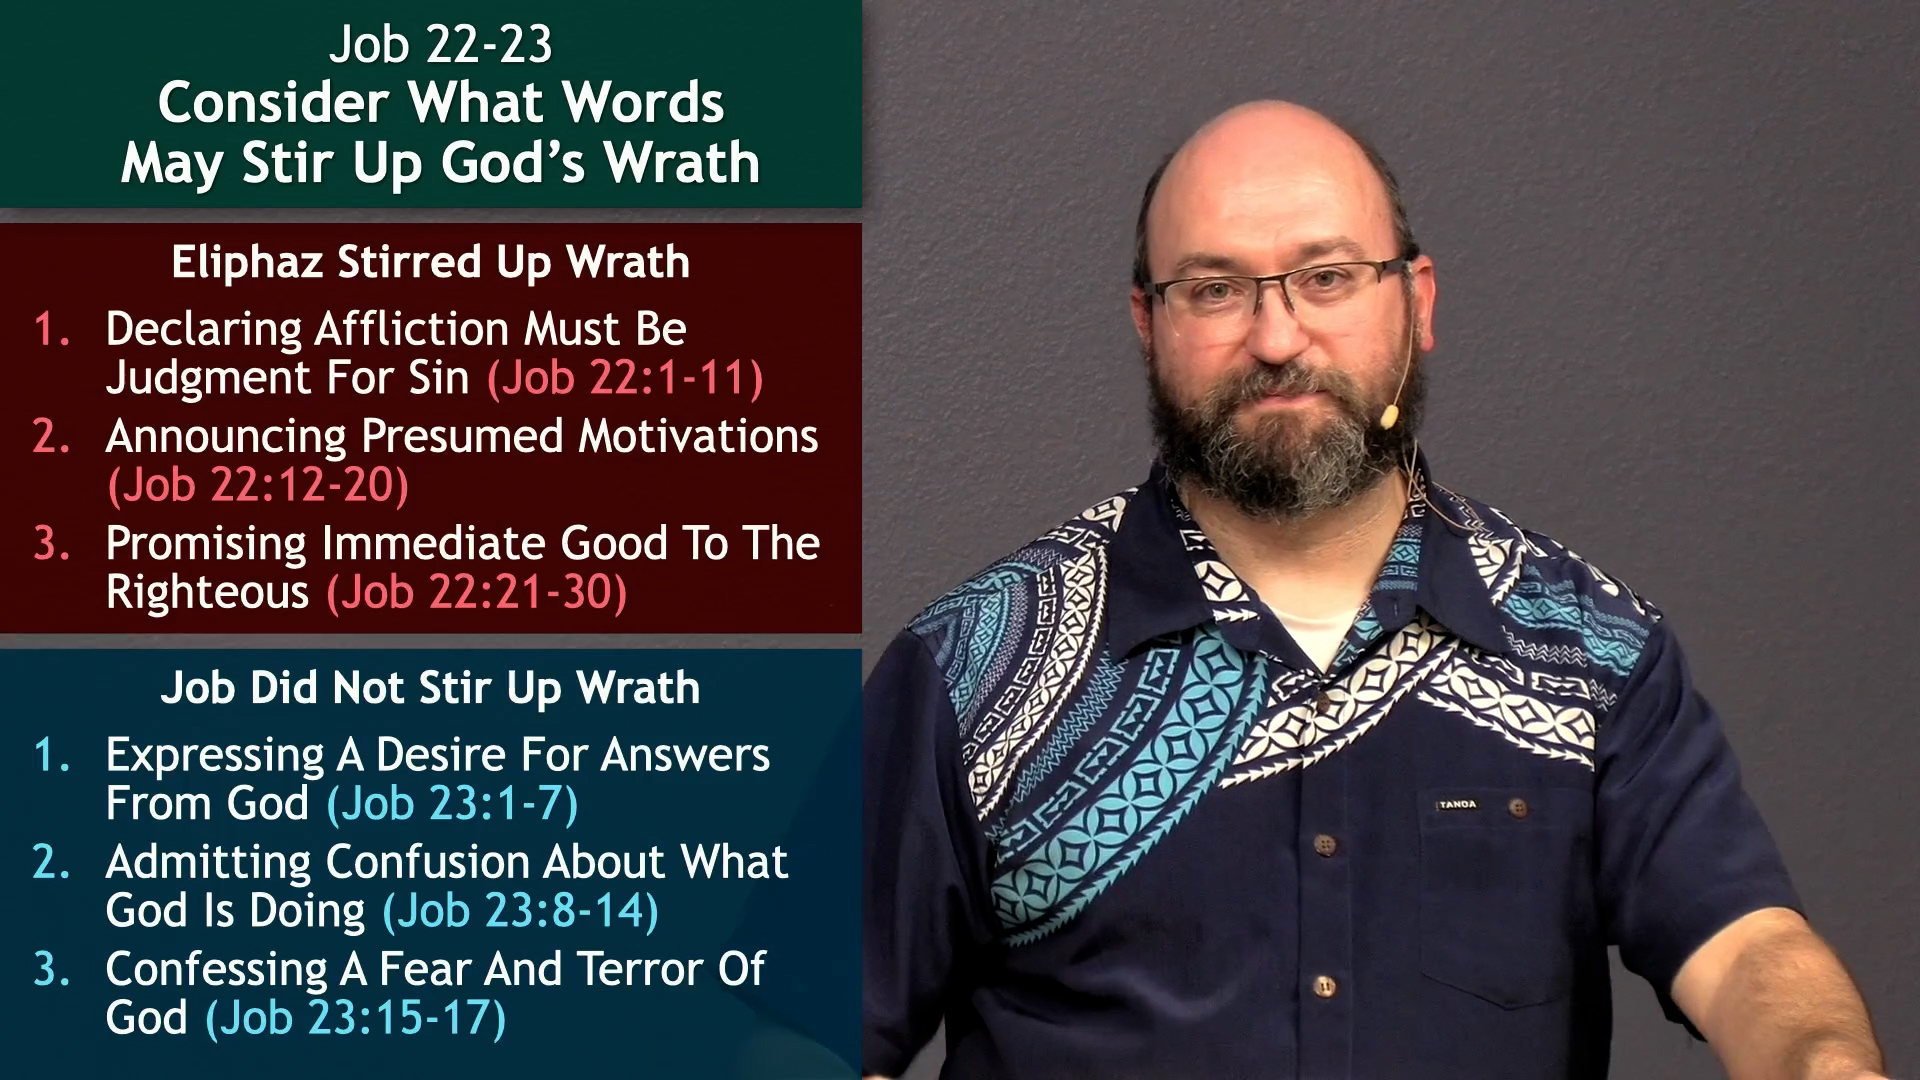 Pastor Jerry Simmons teaching Job 22-23, Consider What Words May Stir Up God's Wrath